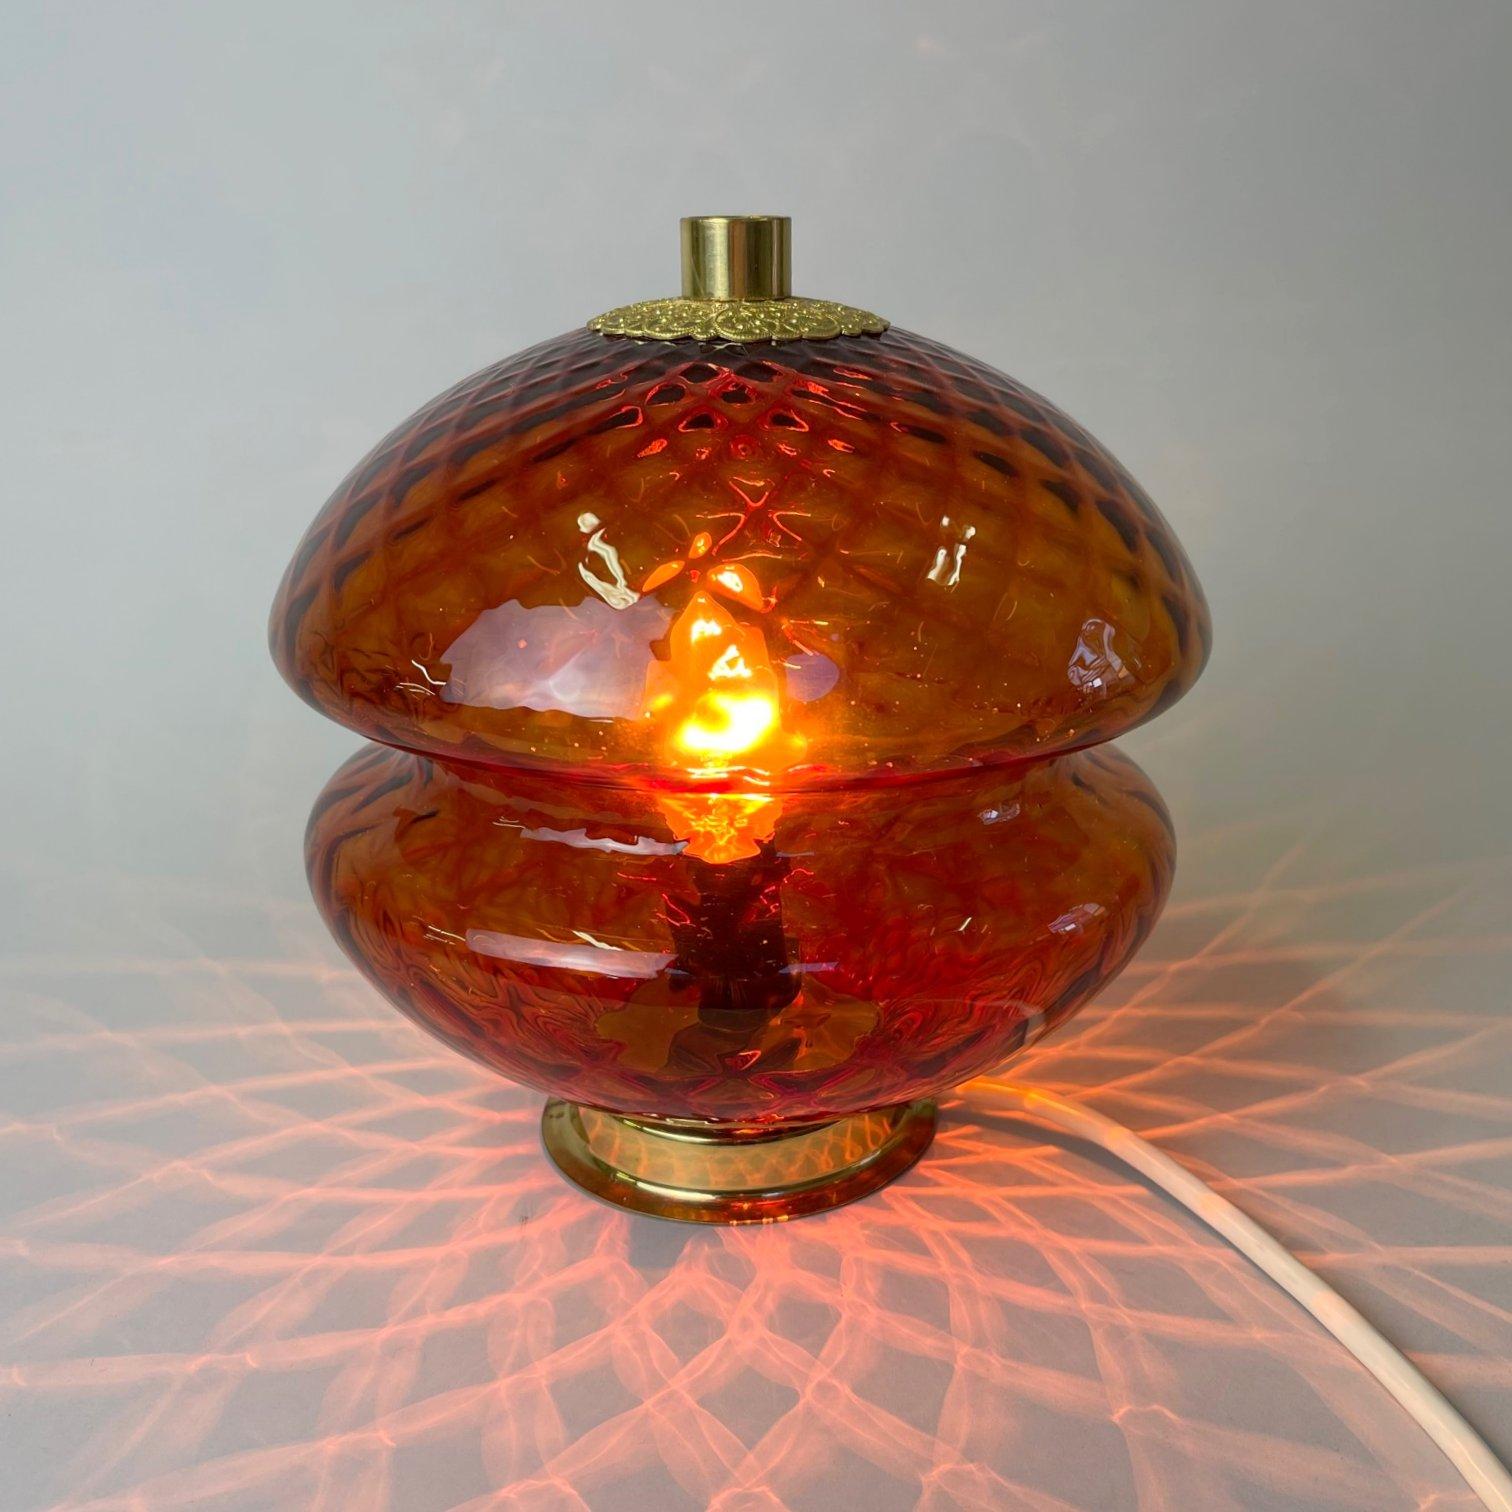 Beautiful glass table lamp or night lamp type T310 / 01 produced by the Czech glass factory Jablonecké Sklárny Desná in the 1960's. The lamp consists of a wonderful, hand-made glass shade in red with an interesting shape and structure in a diamond